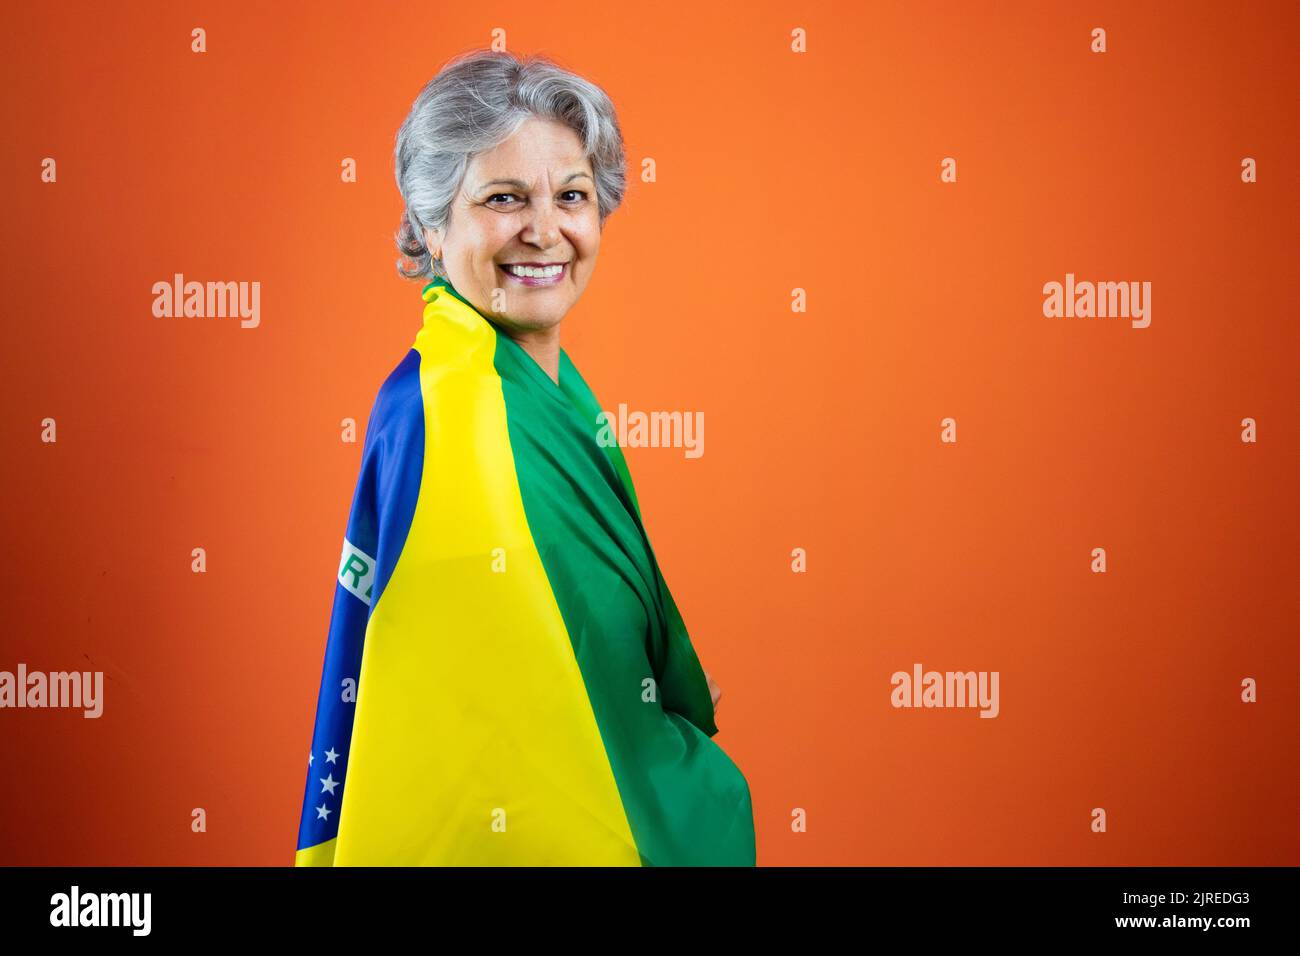 Mature Woman with Gray Hare Holding Brazil Flag Stock Photo